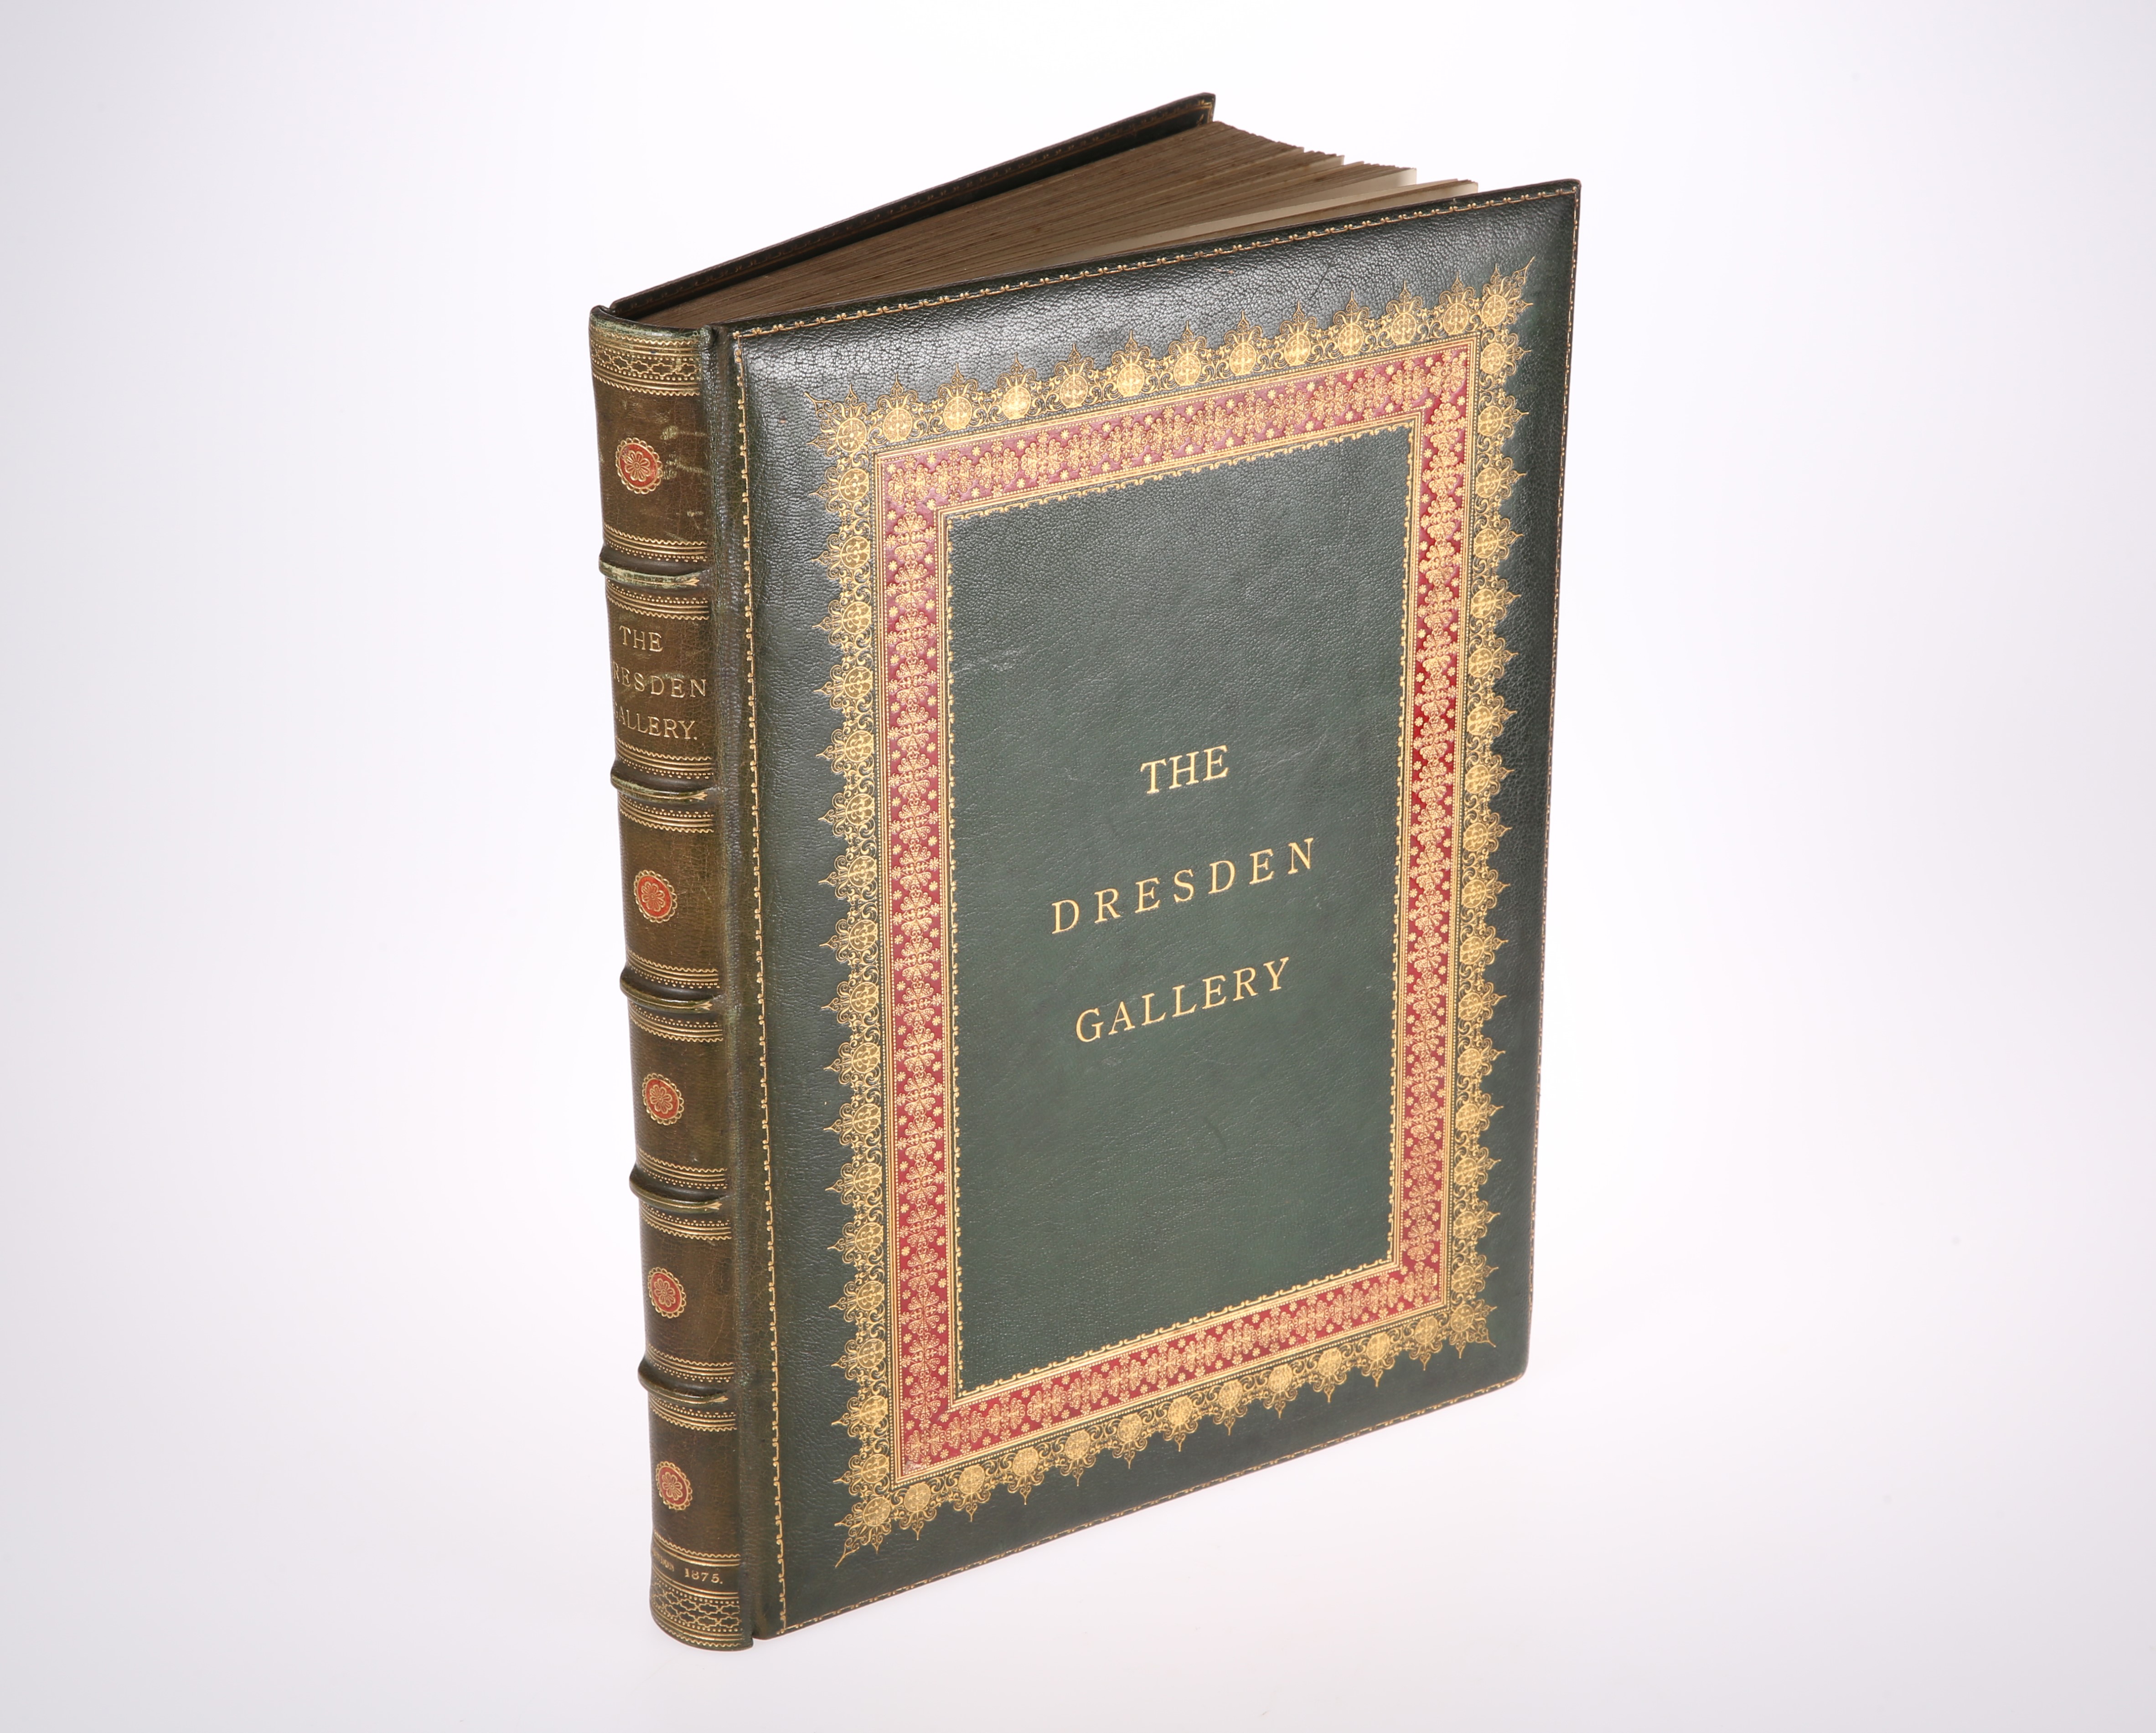 DRESDEN GALLERY, finely bound by Bickers, 1873.